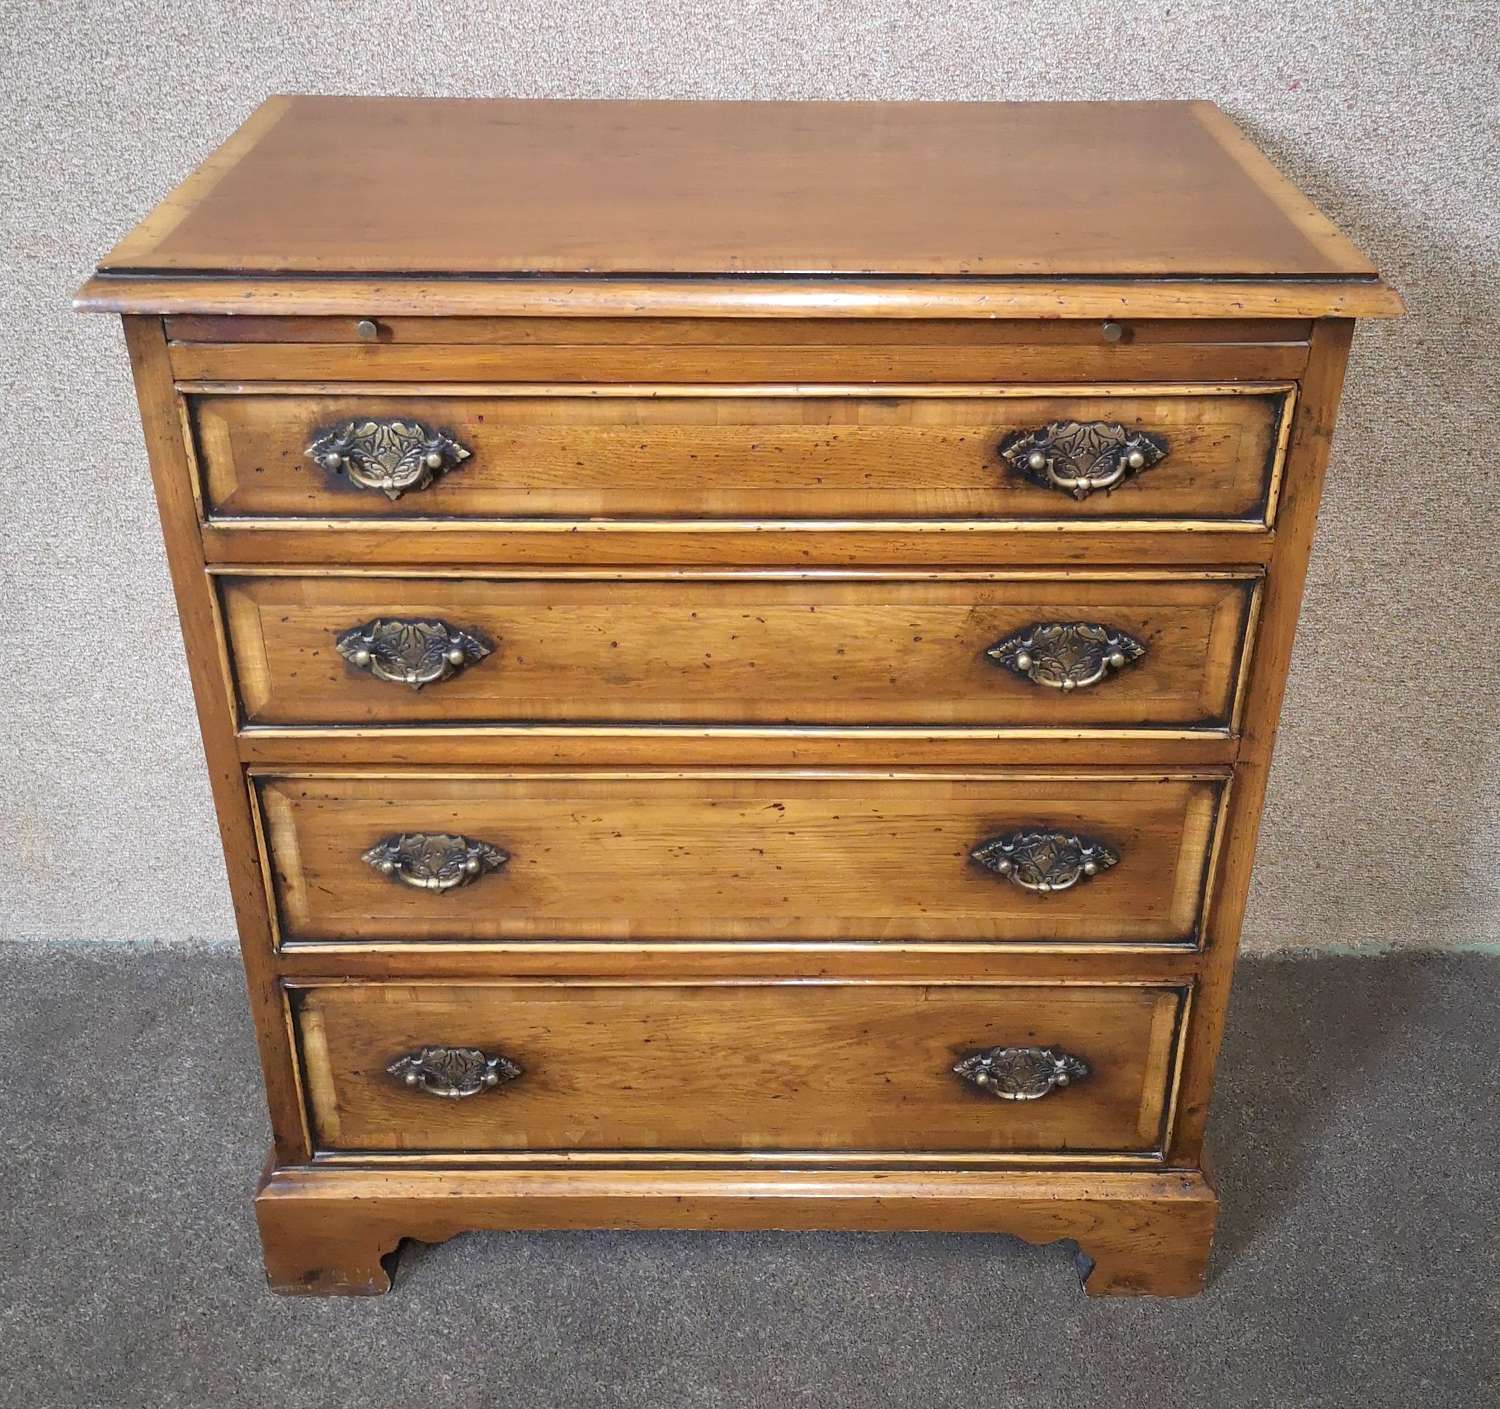 Small Oak & Walnut Chest of Drawers In The Georgian Style